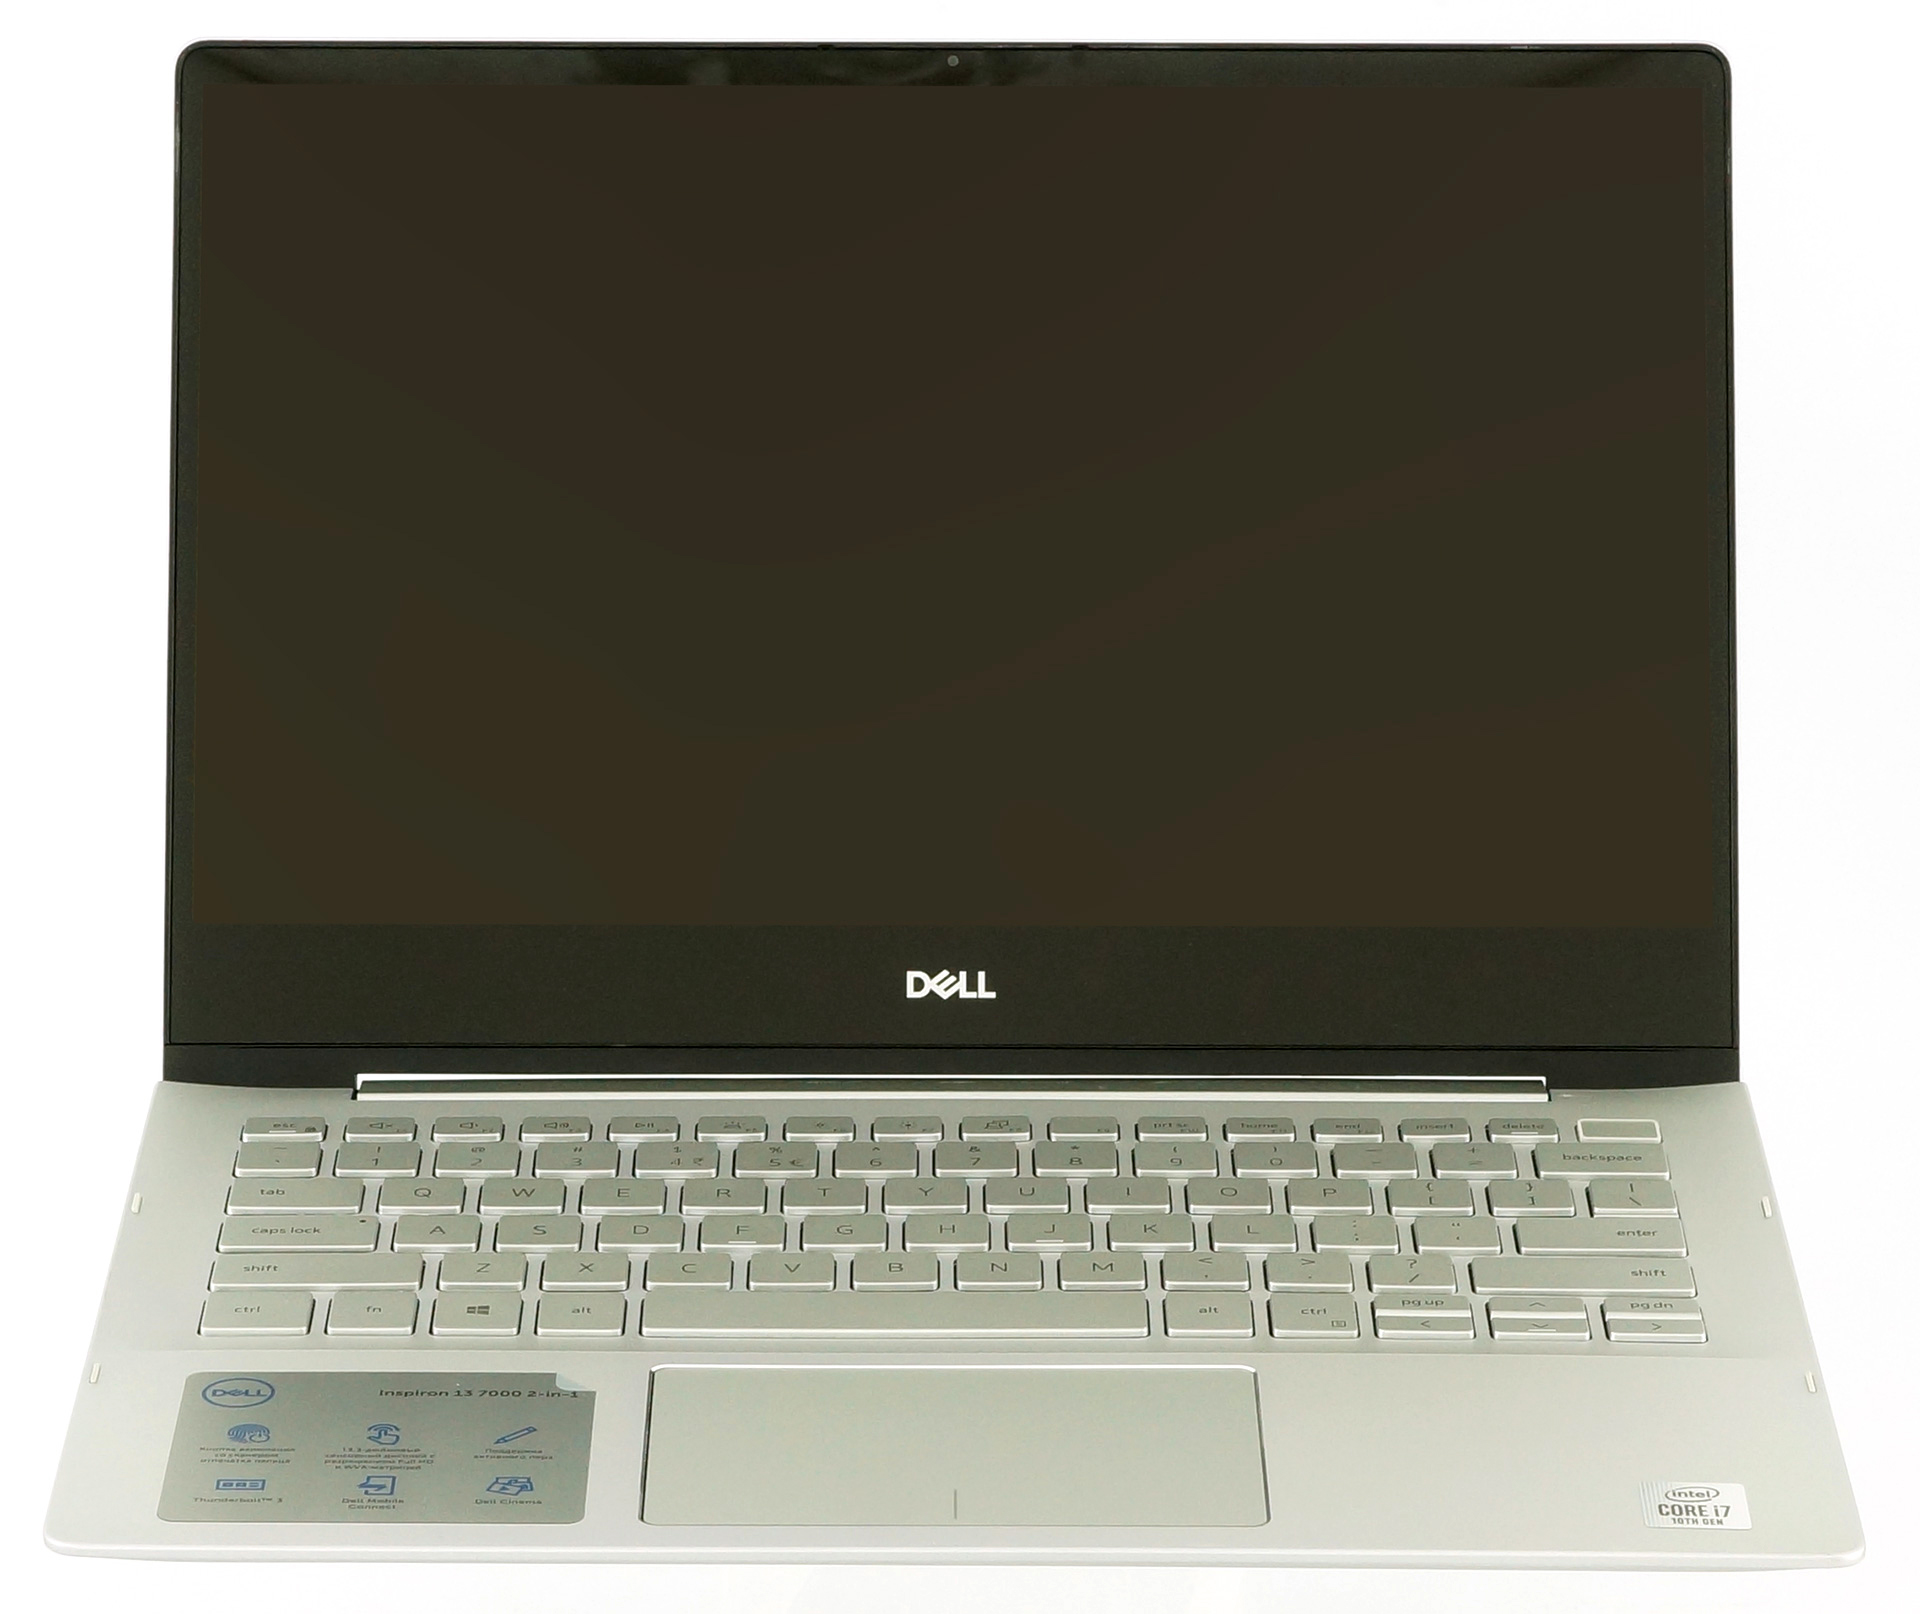 Dell Inspiron 13 7391 2-in-1 review - this thing will easily last 